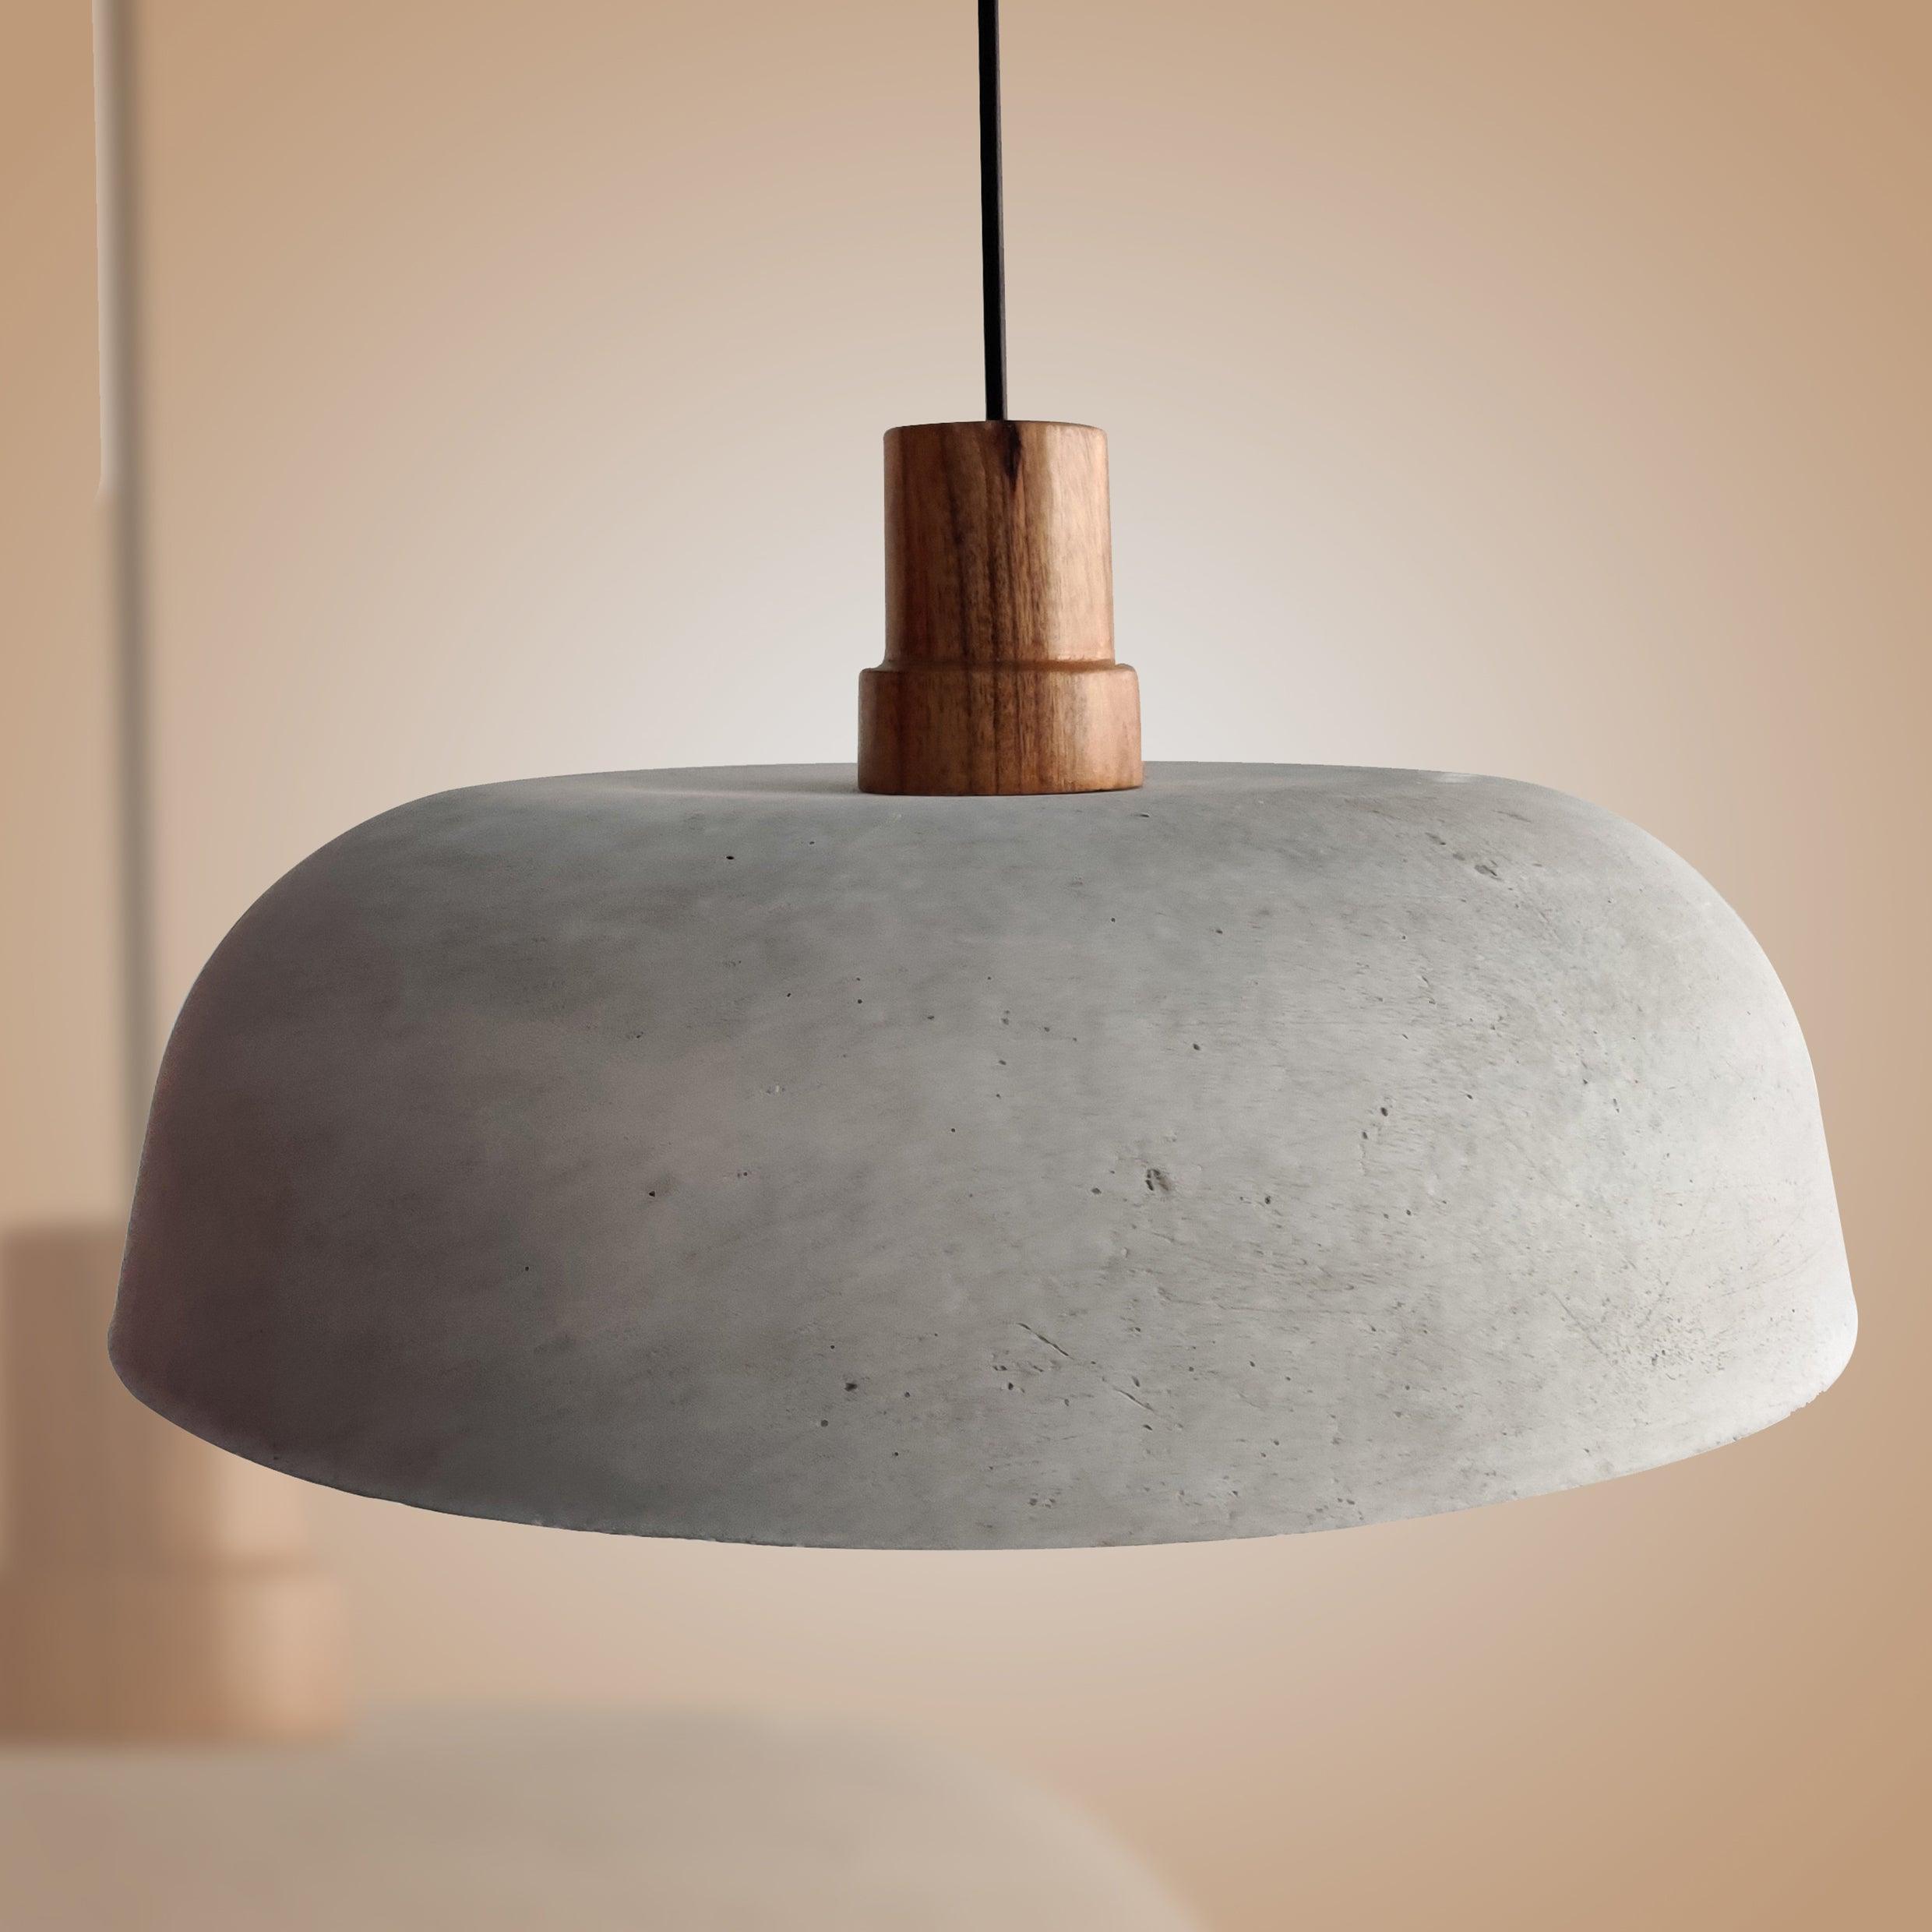 ANKUR NORDIC WIDE CONCRETE HANGING WITH NATURAL WOOD - Ankur Lighting